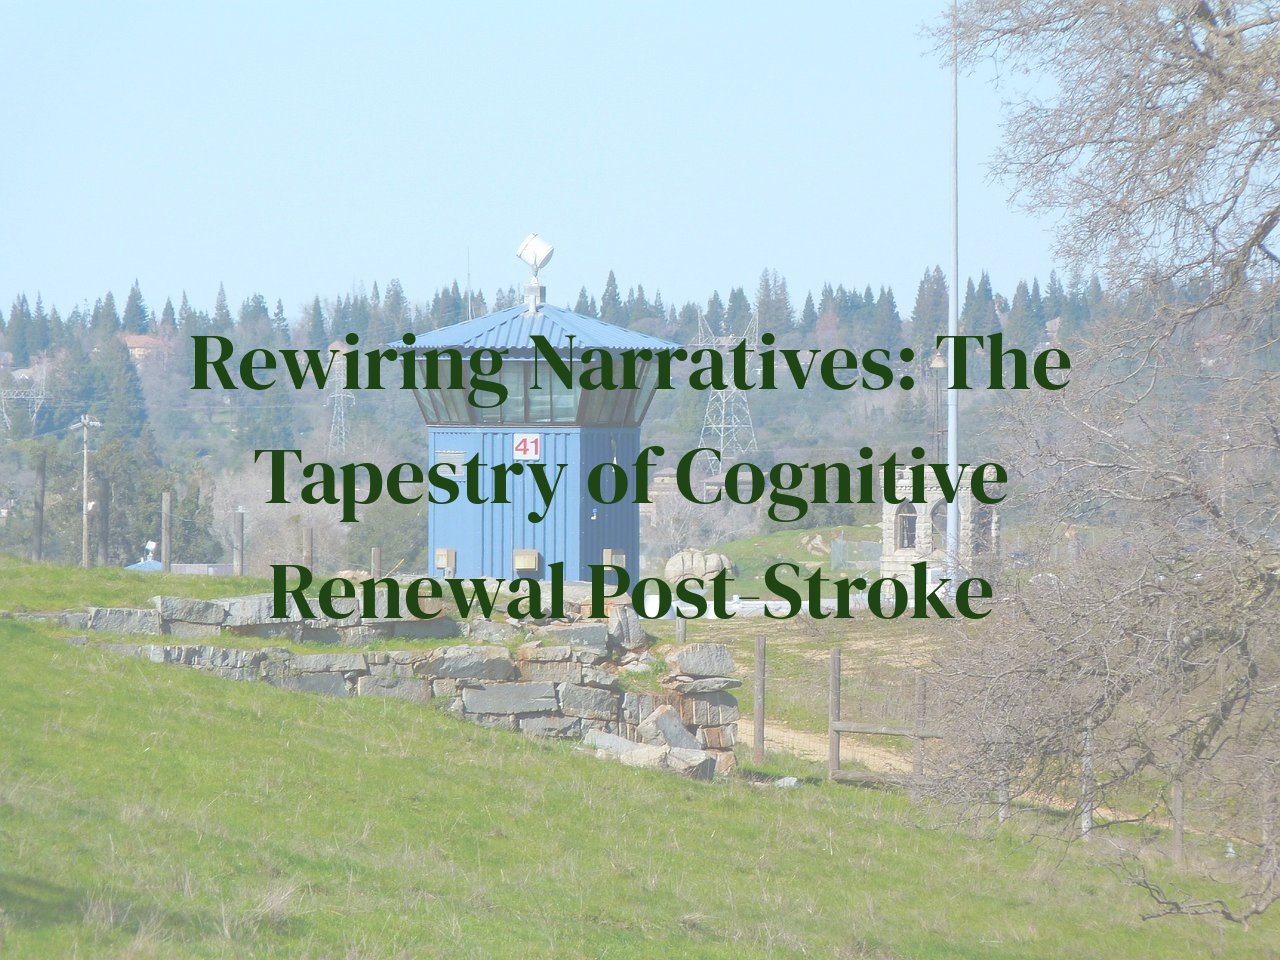 Rewiring Narratives: The Tapestry of Cognitive Renewal Post-Stroke